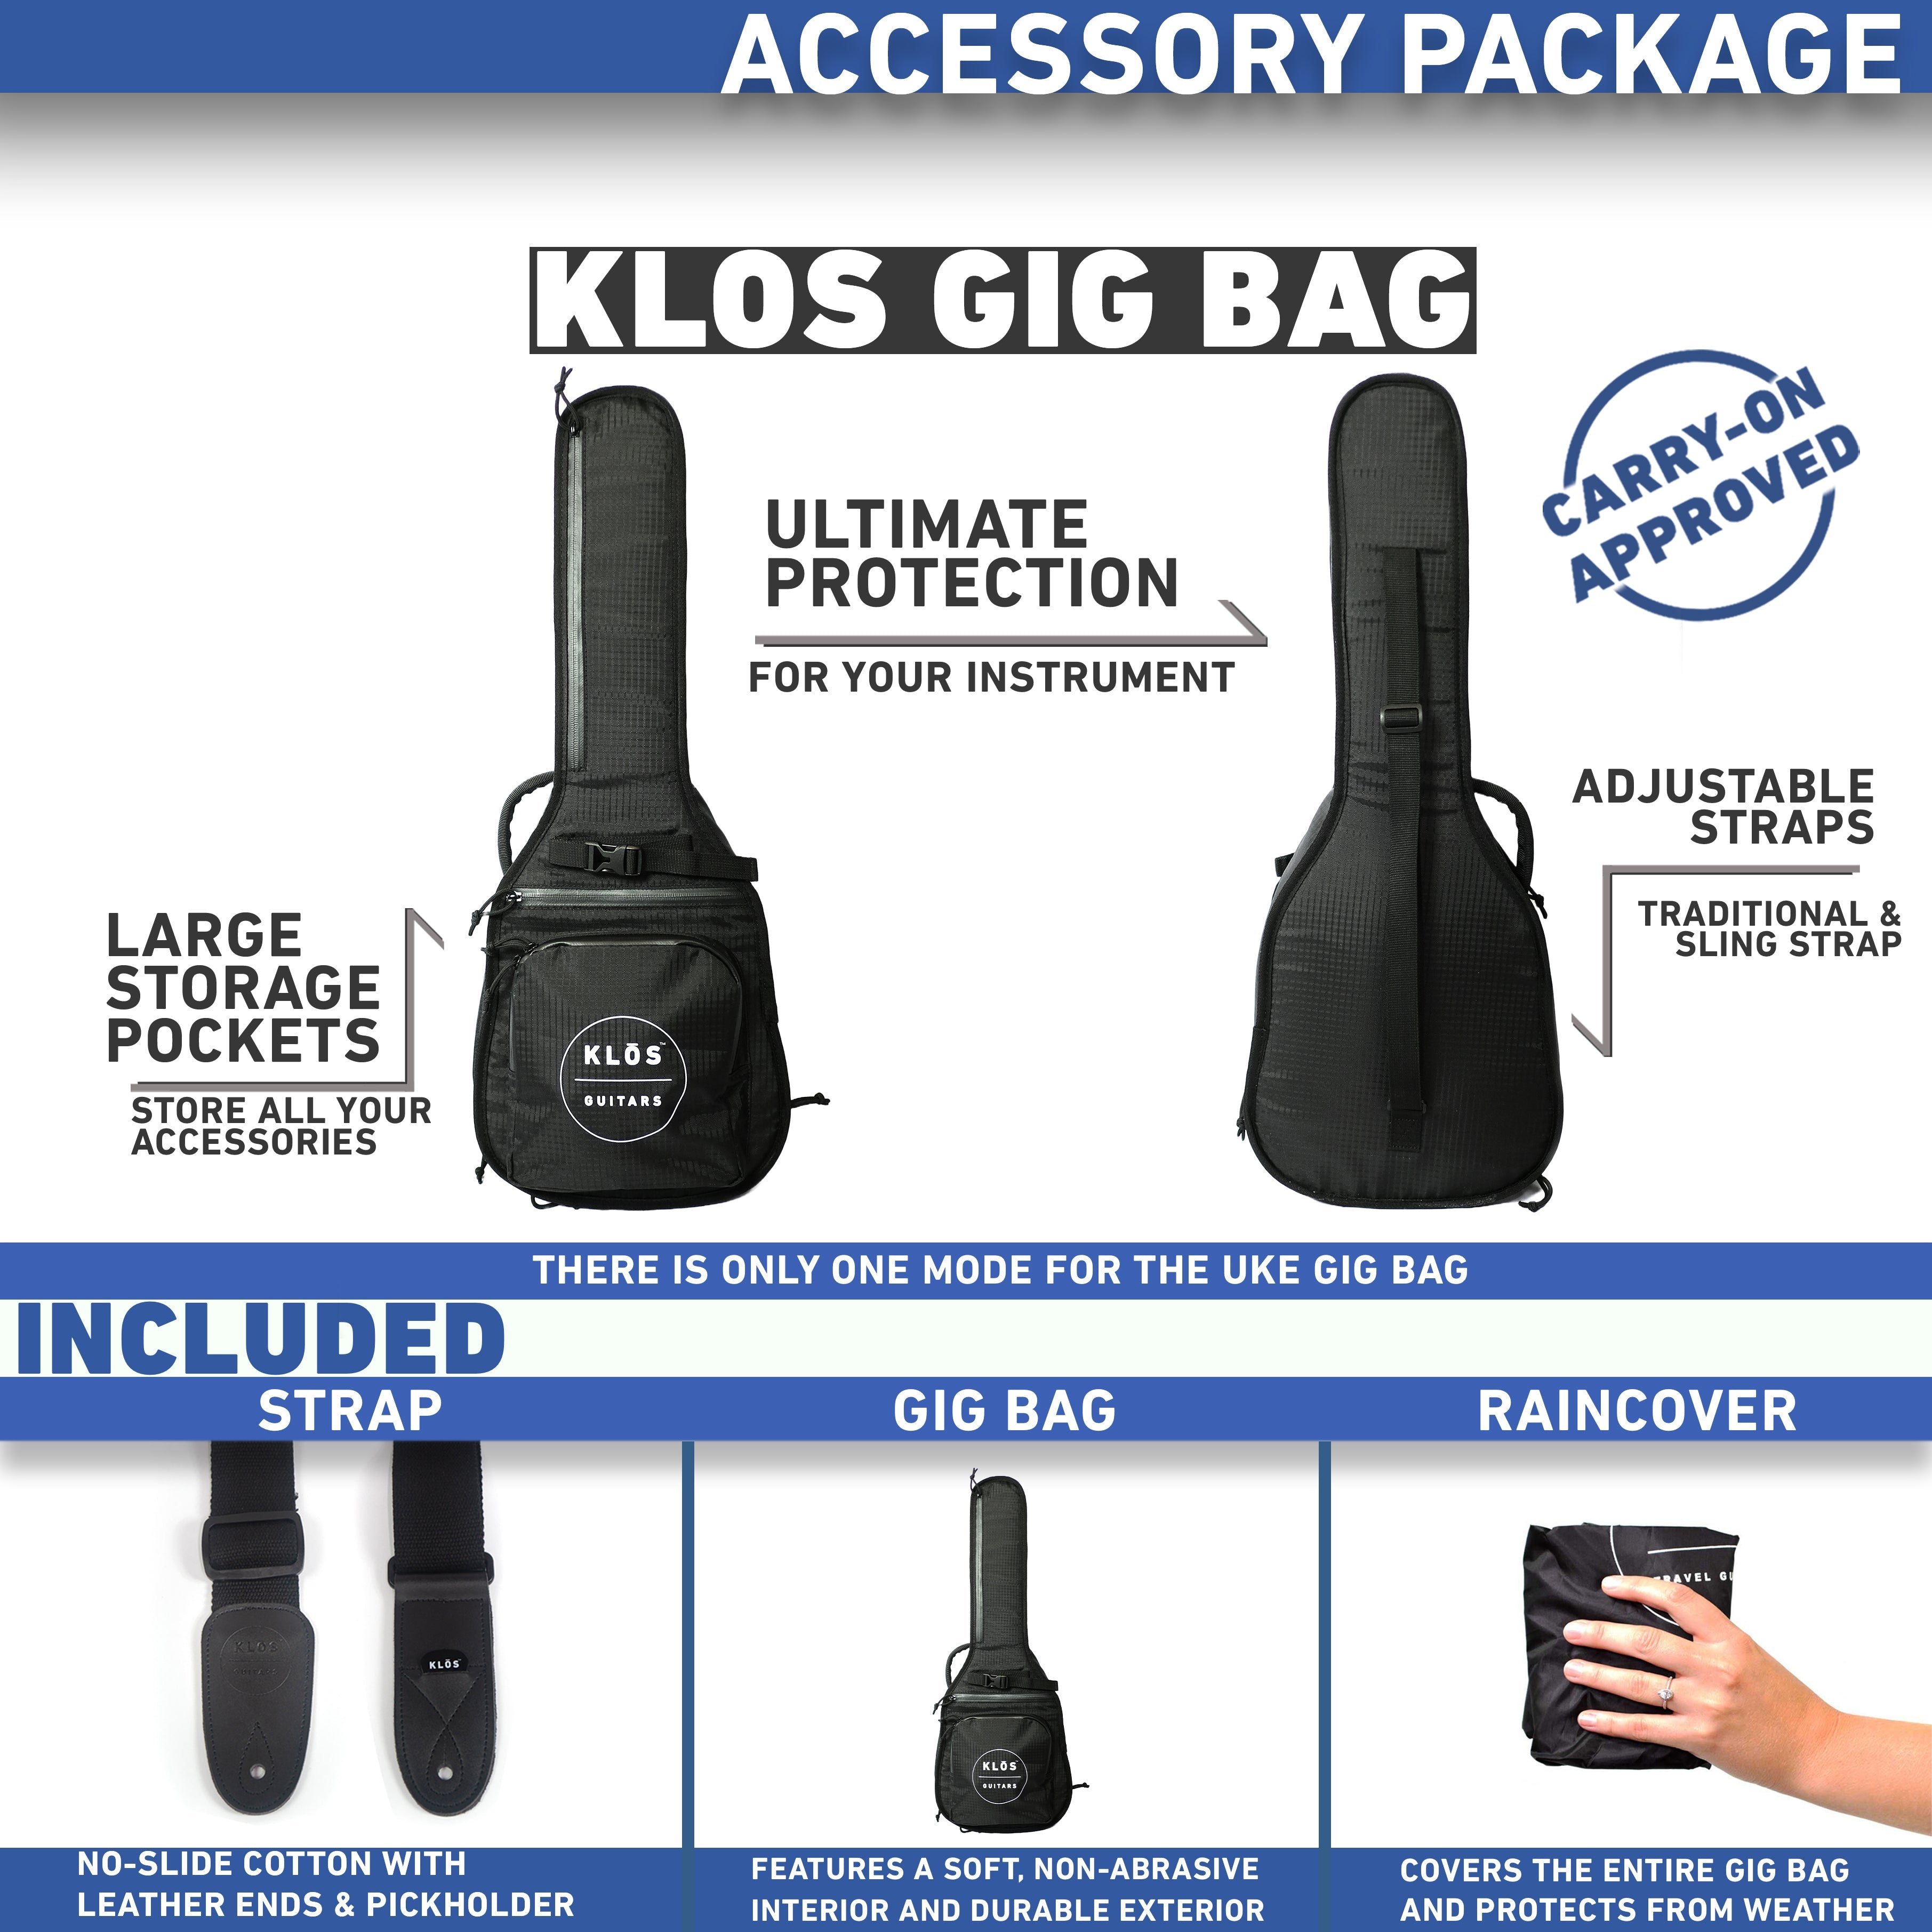 Gig bag. Carry-on approved. Accessory bundle. 